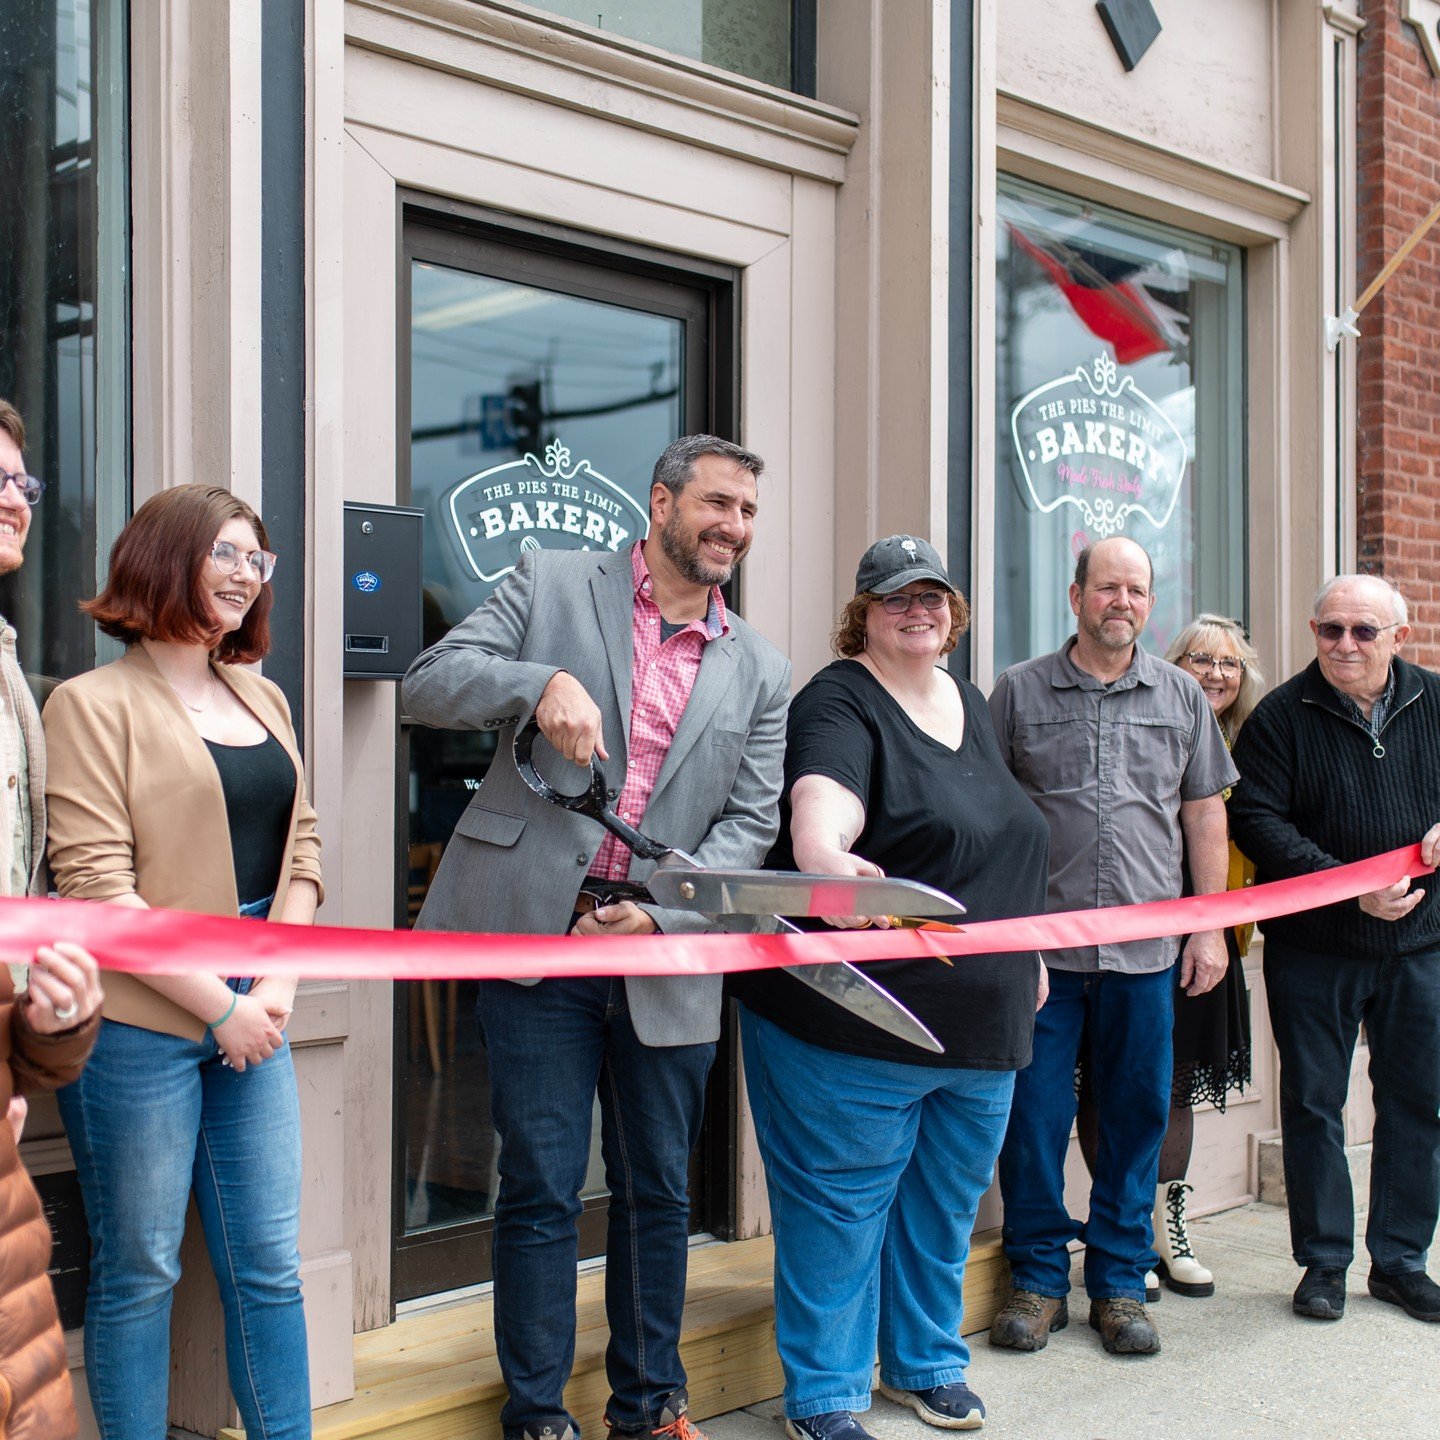 Feature Friday: The Pies the Limit Bakery!

thepiesthelimitbakeryvt is a specialty bakery located in the heart of @downtownrutland. The new retail location opened this week on Wednesday, May 1st, and sold out three times on the same day! We are very 